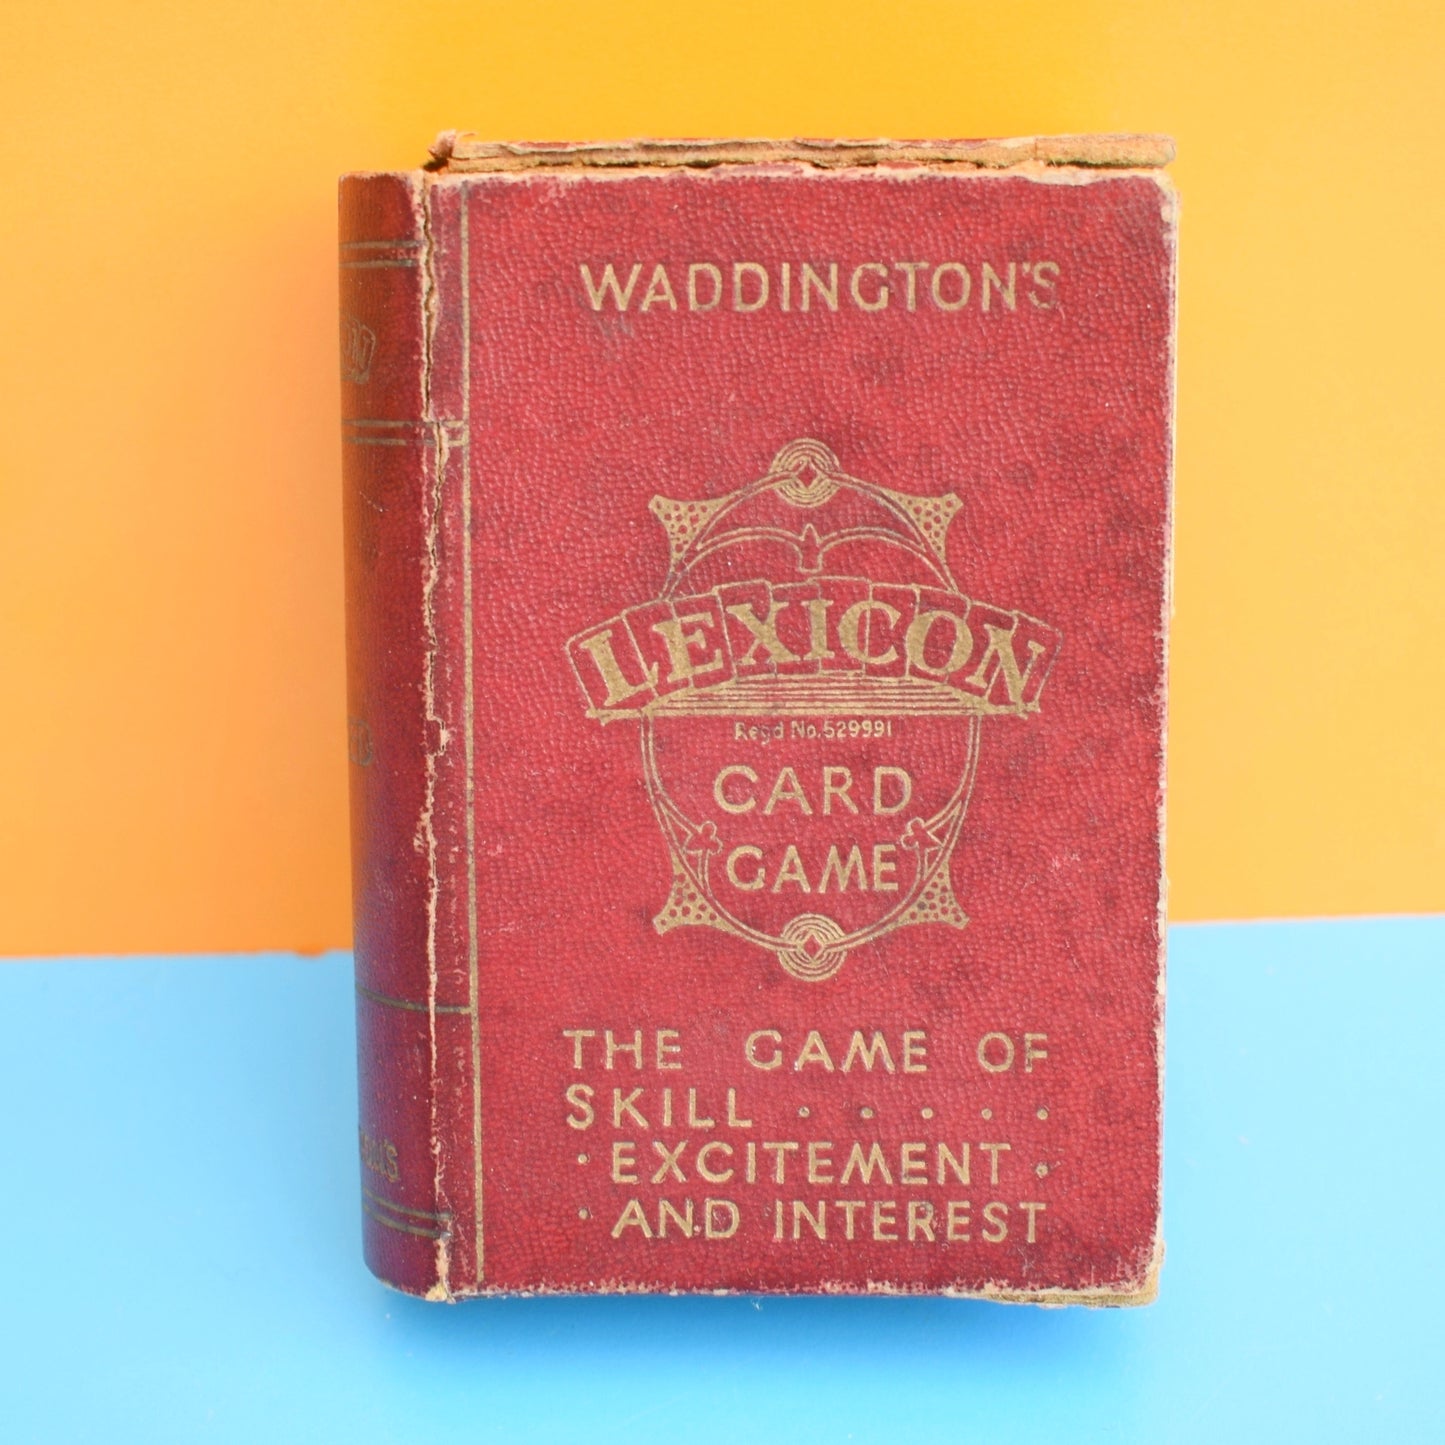 Vintage 1950s Card Game - Lexicon - Anagrams - Craft